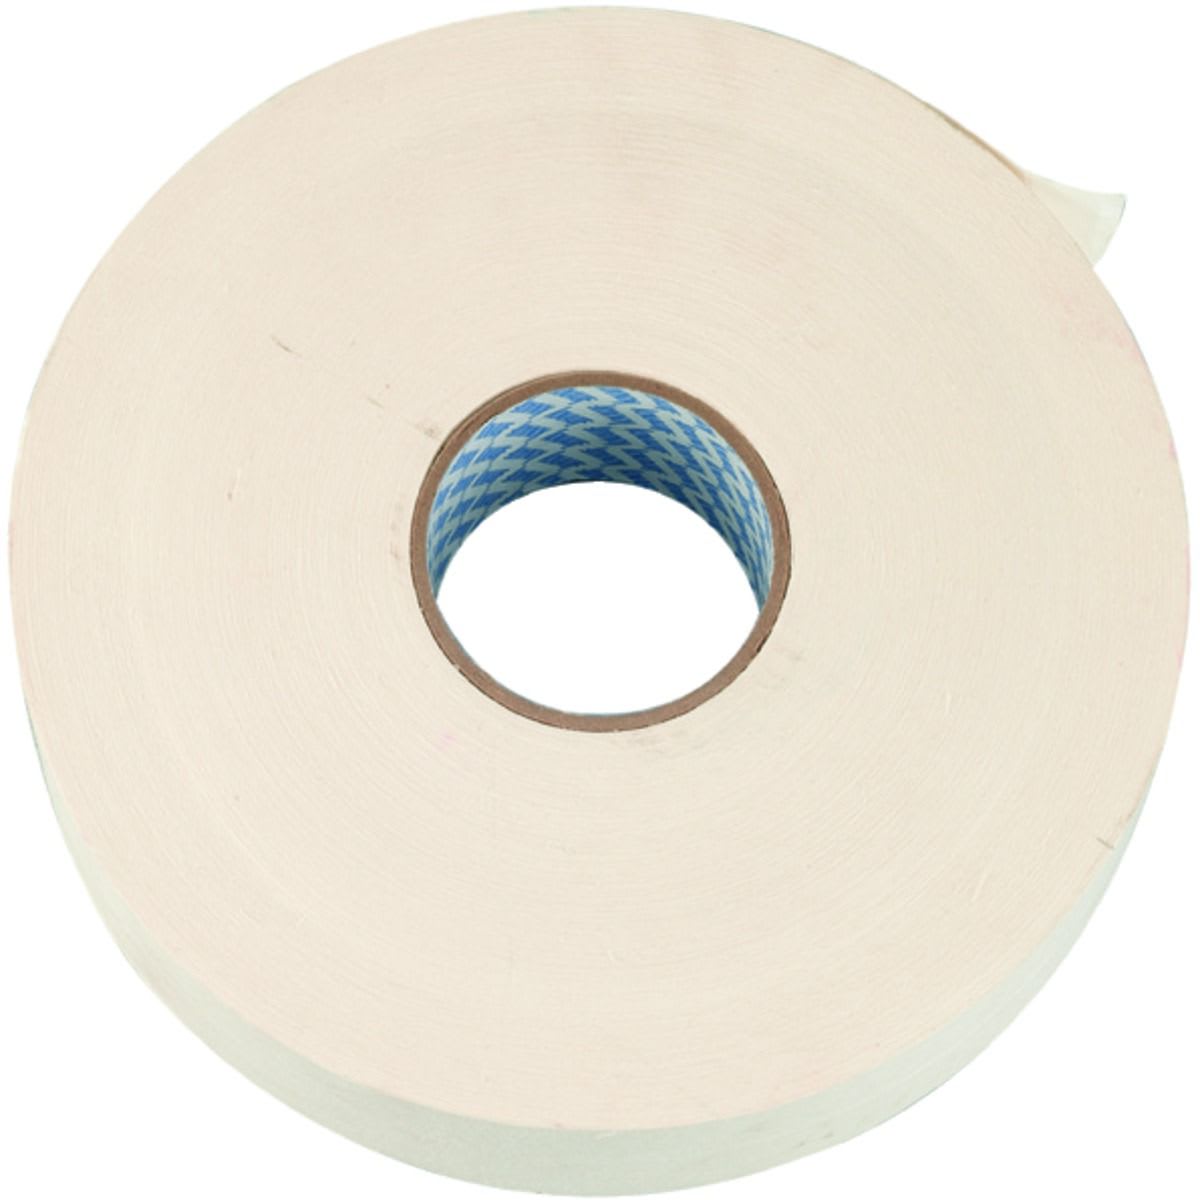 Knauf Reinforcing Joint Tape For Plasterboards - 50mm